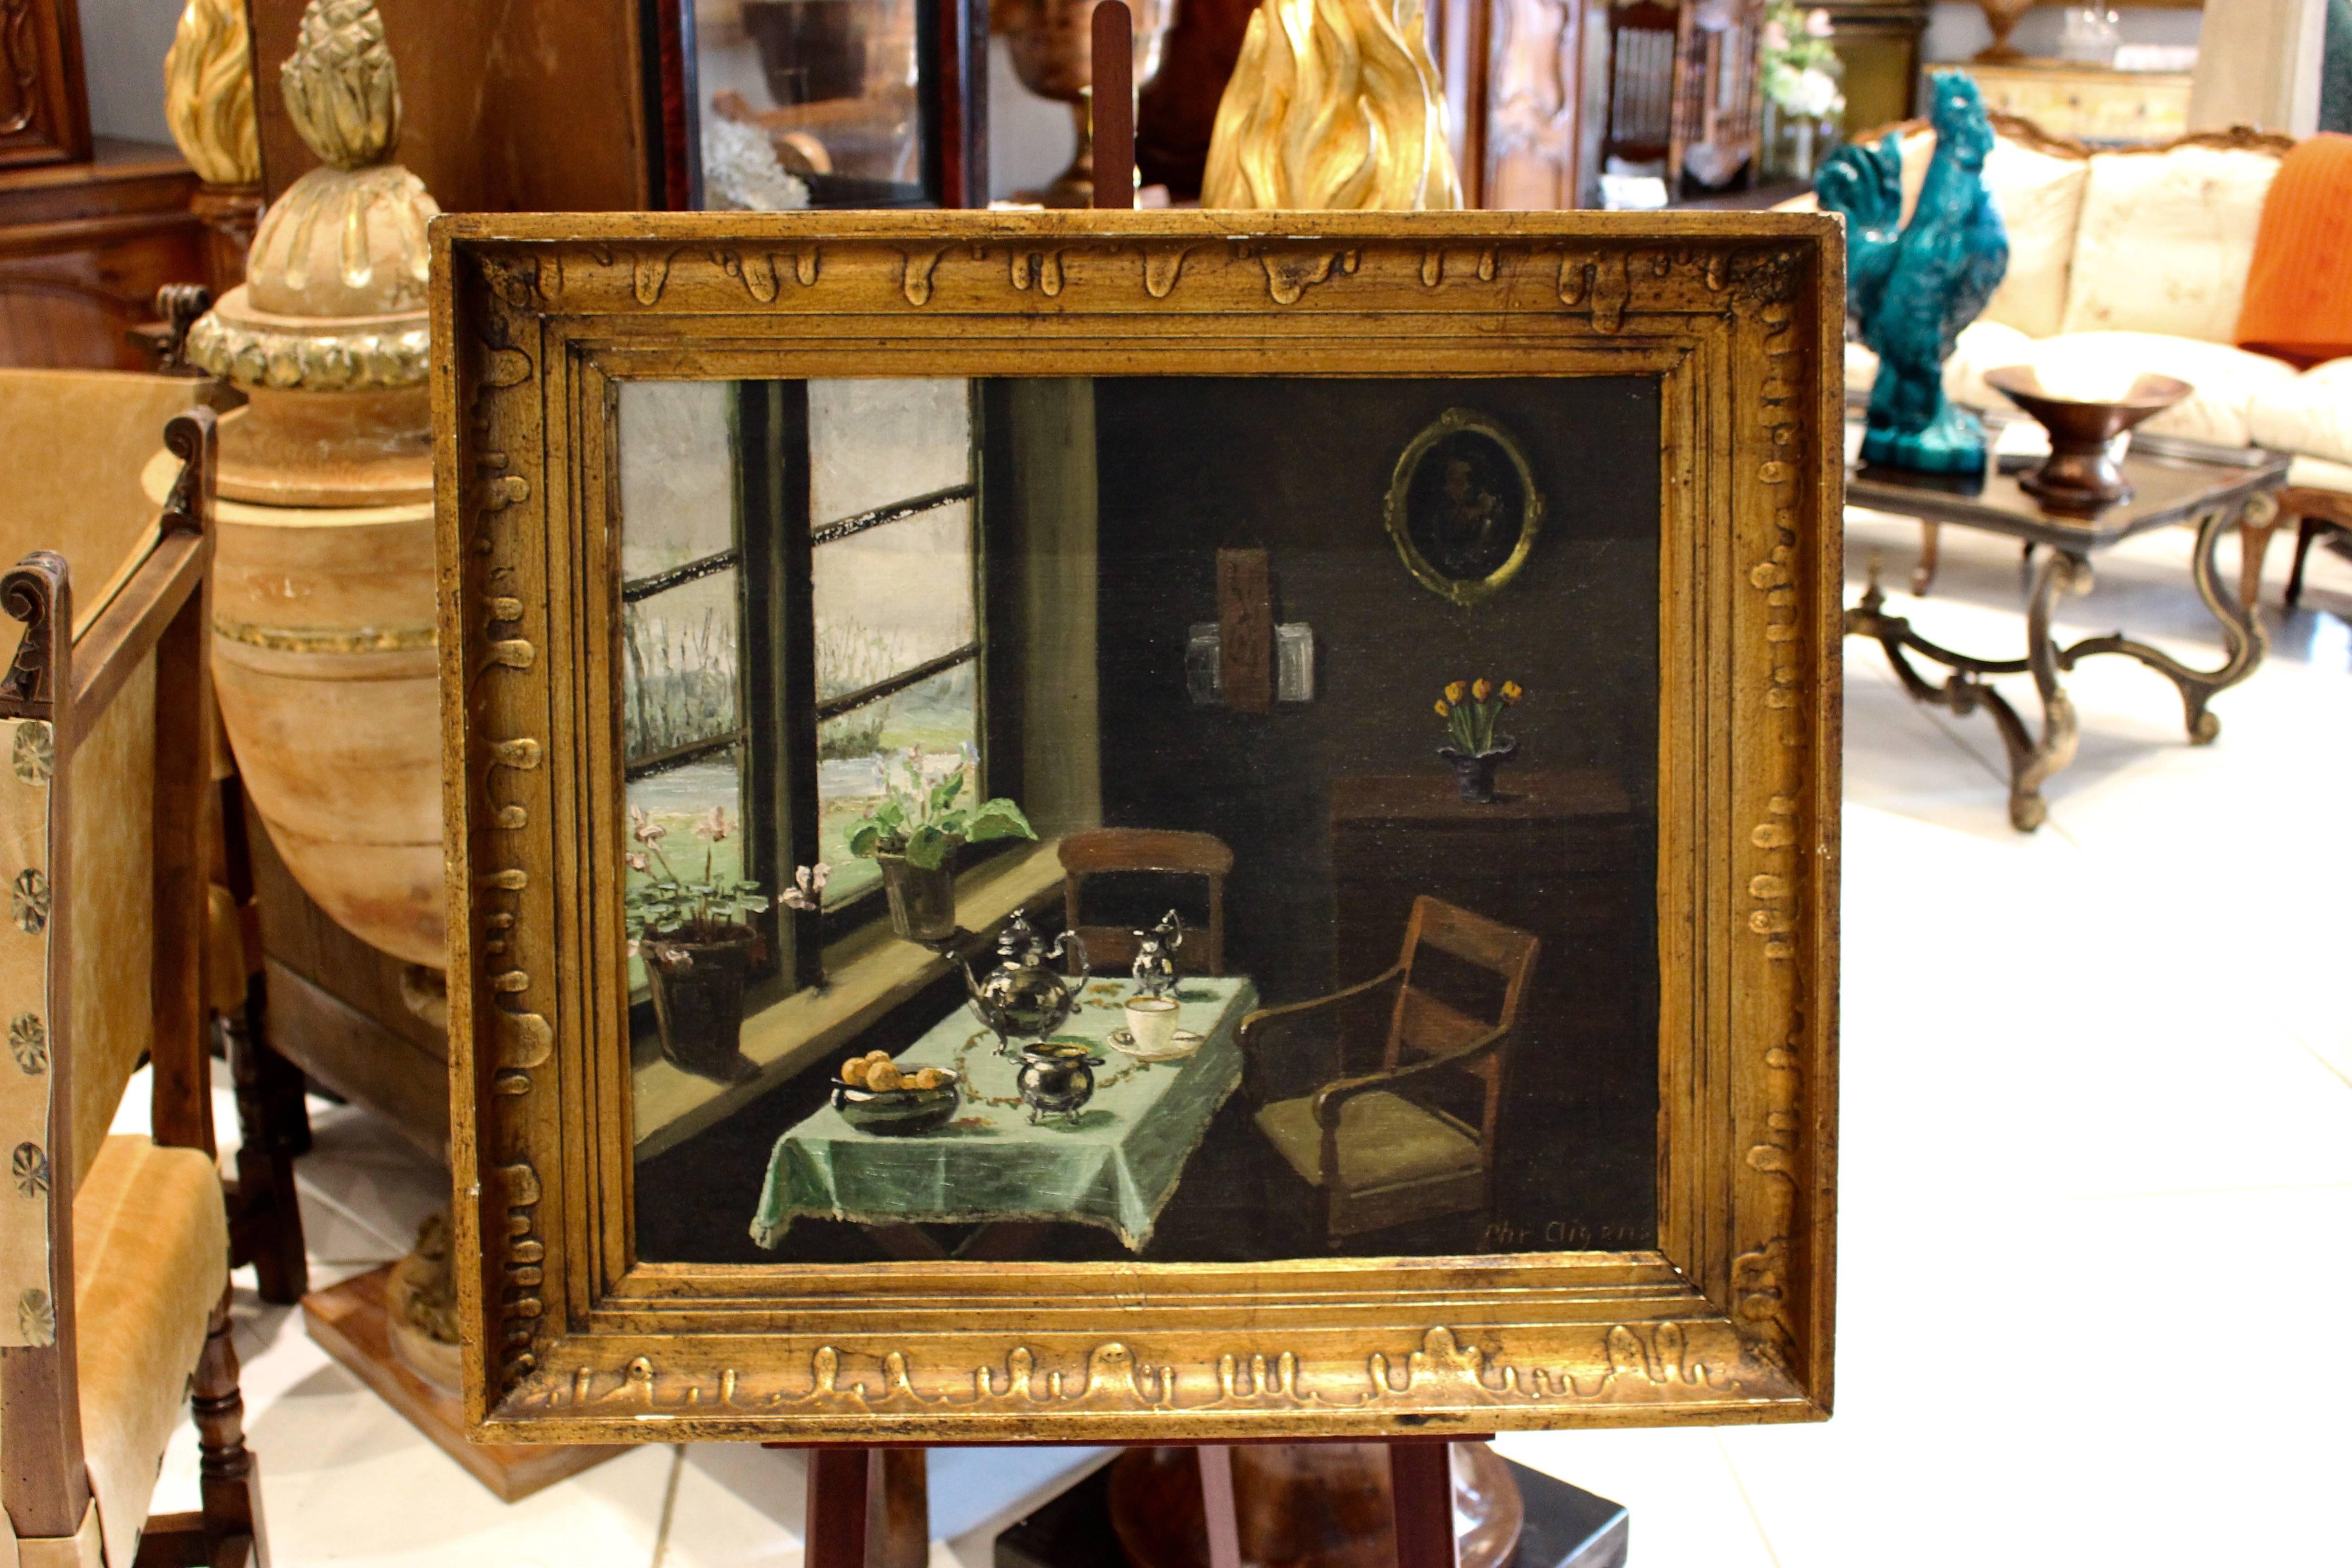 Painting - oil on canvas - Inside Drawing Room with Set Table. Signed Crigensm. Early 20th Century.